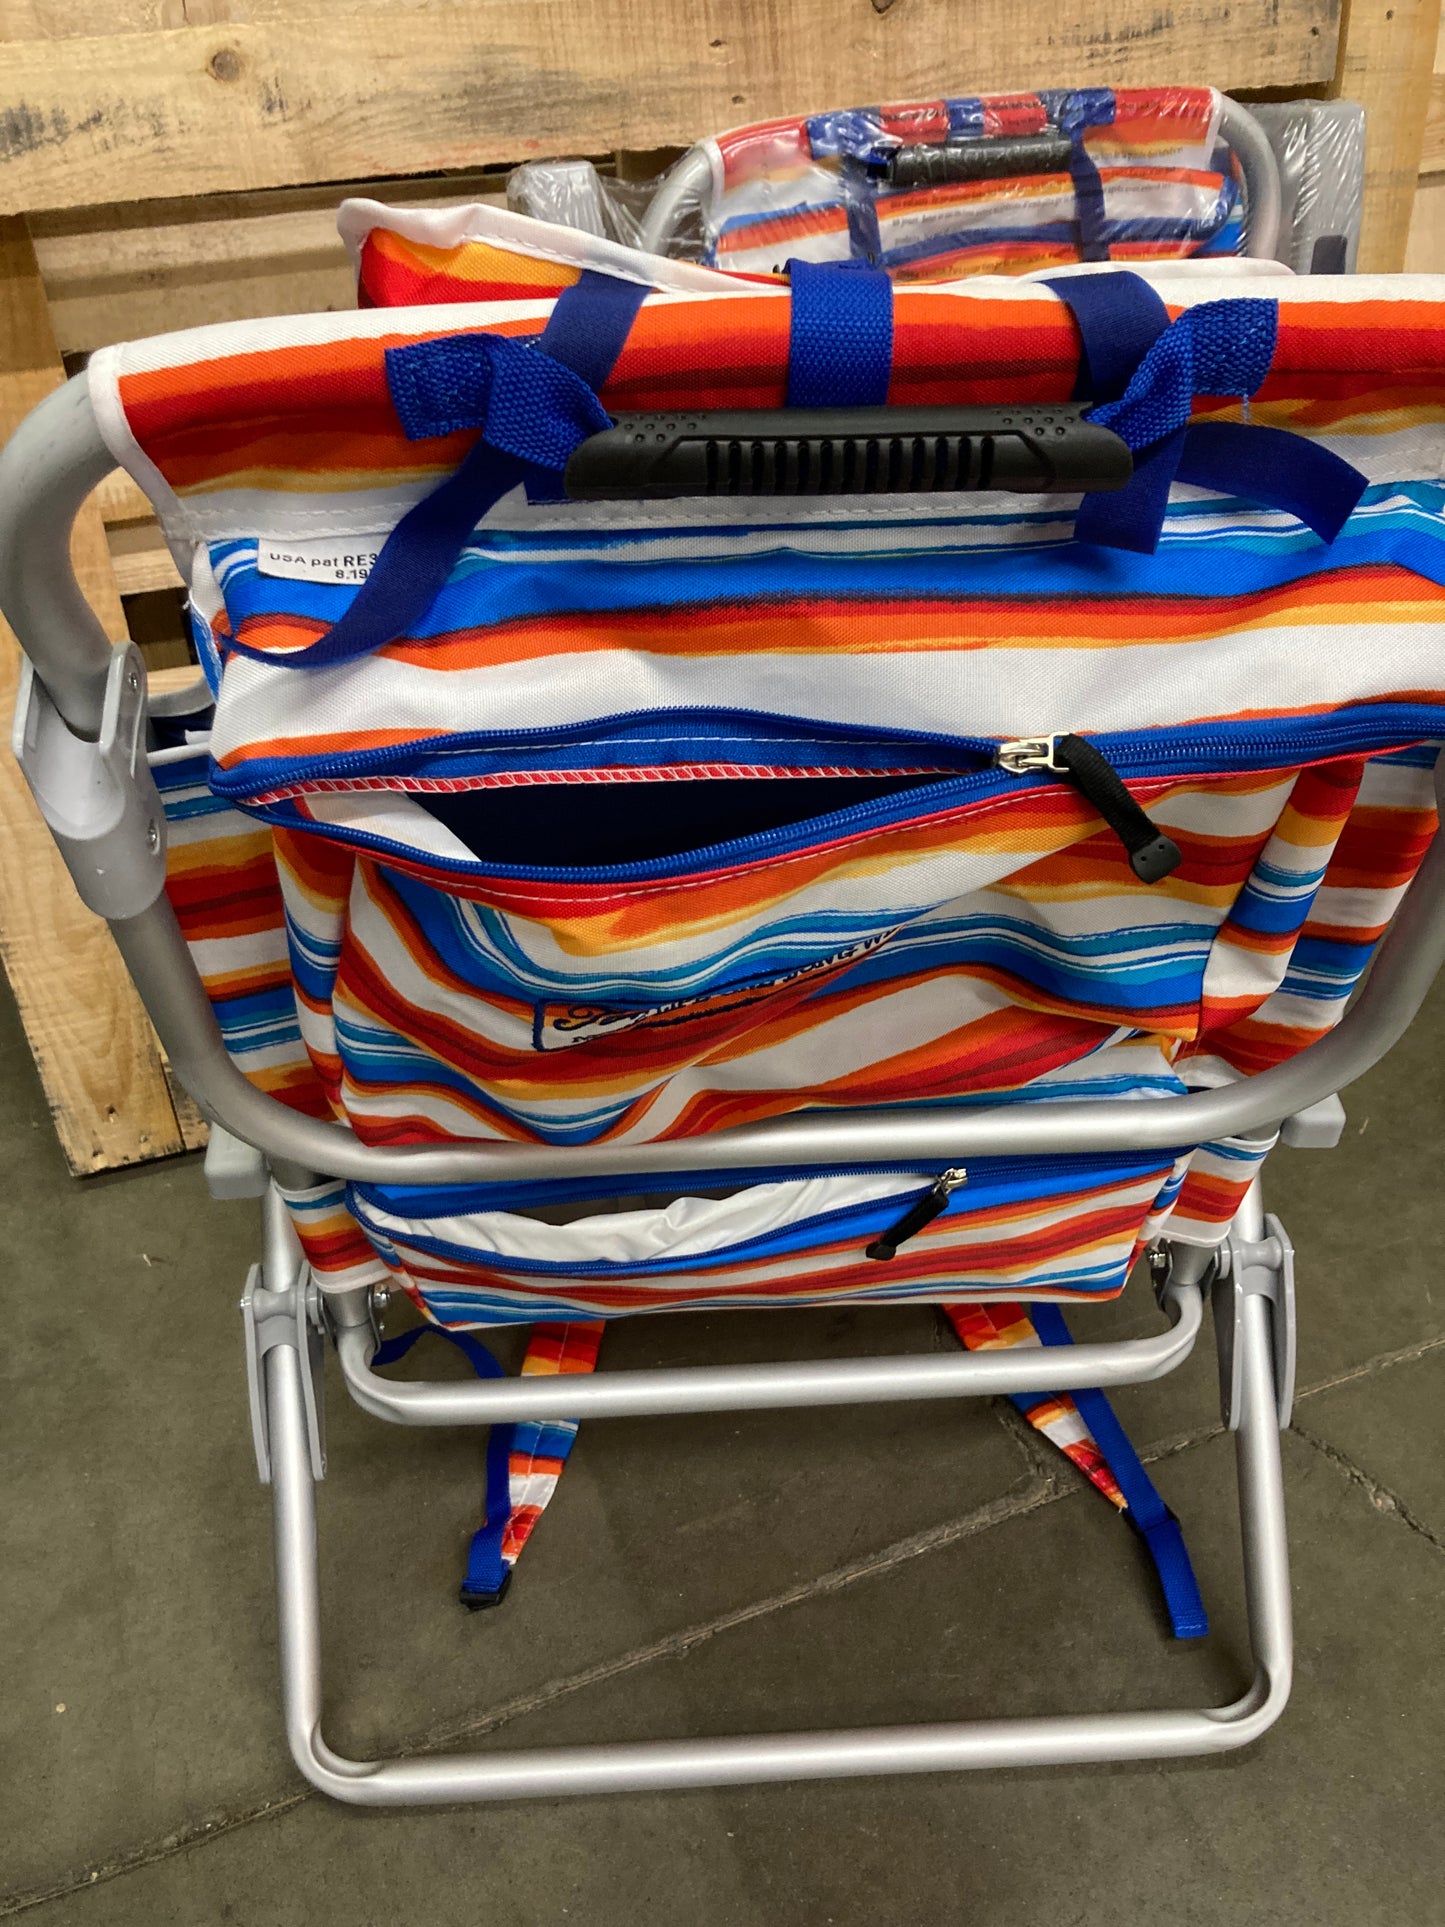 NEW - Costco - Set of 2 Tommy Bahama Beach Chairs - Retail $90 Default Title